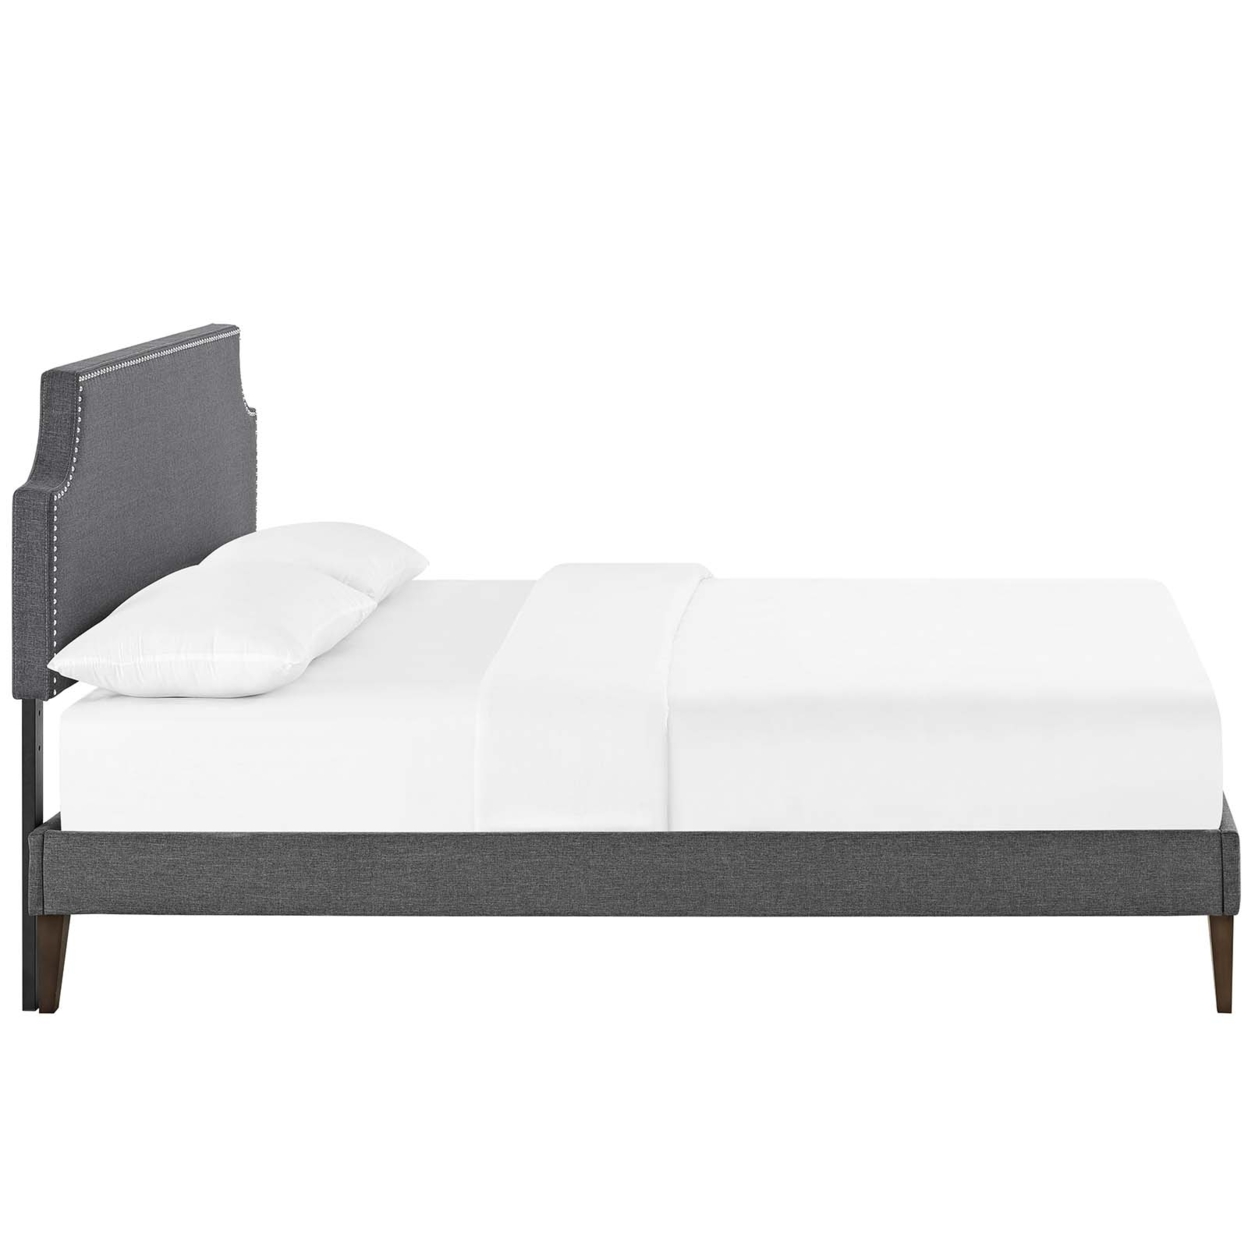 Corene King Fabric Platform Bed With Squared Tapered Legs, Gray